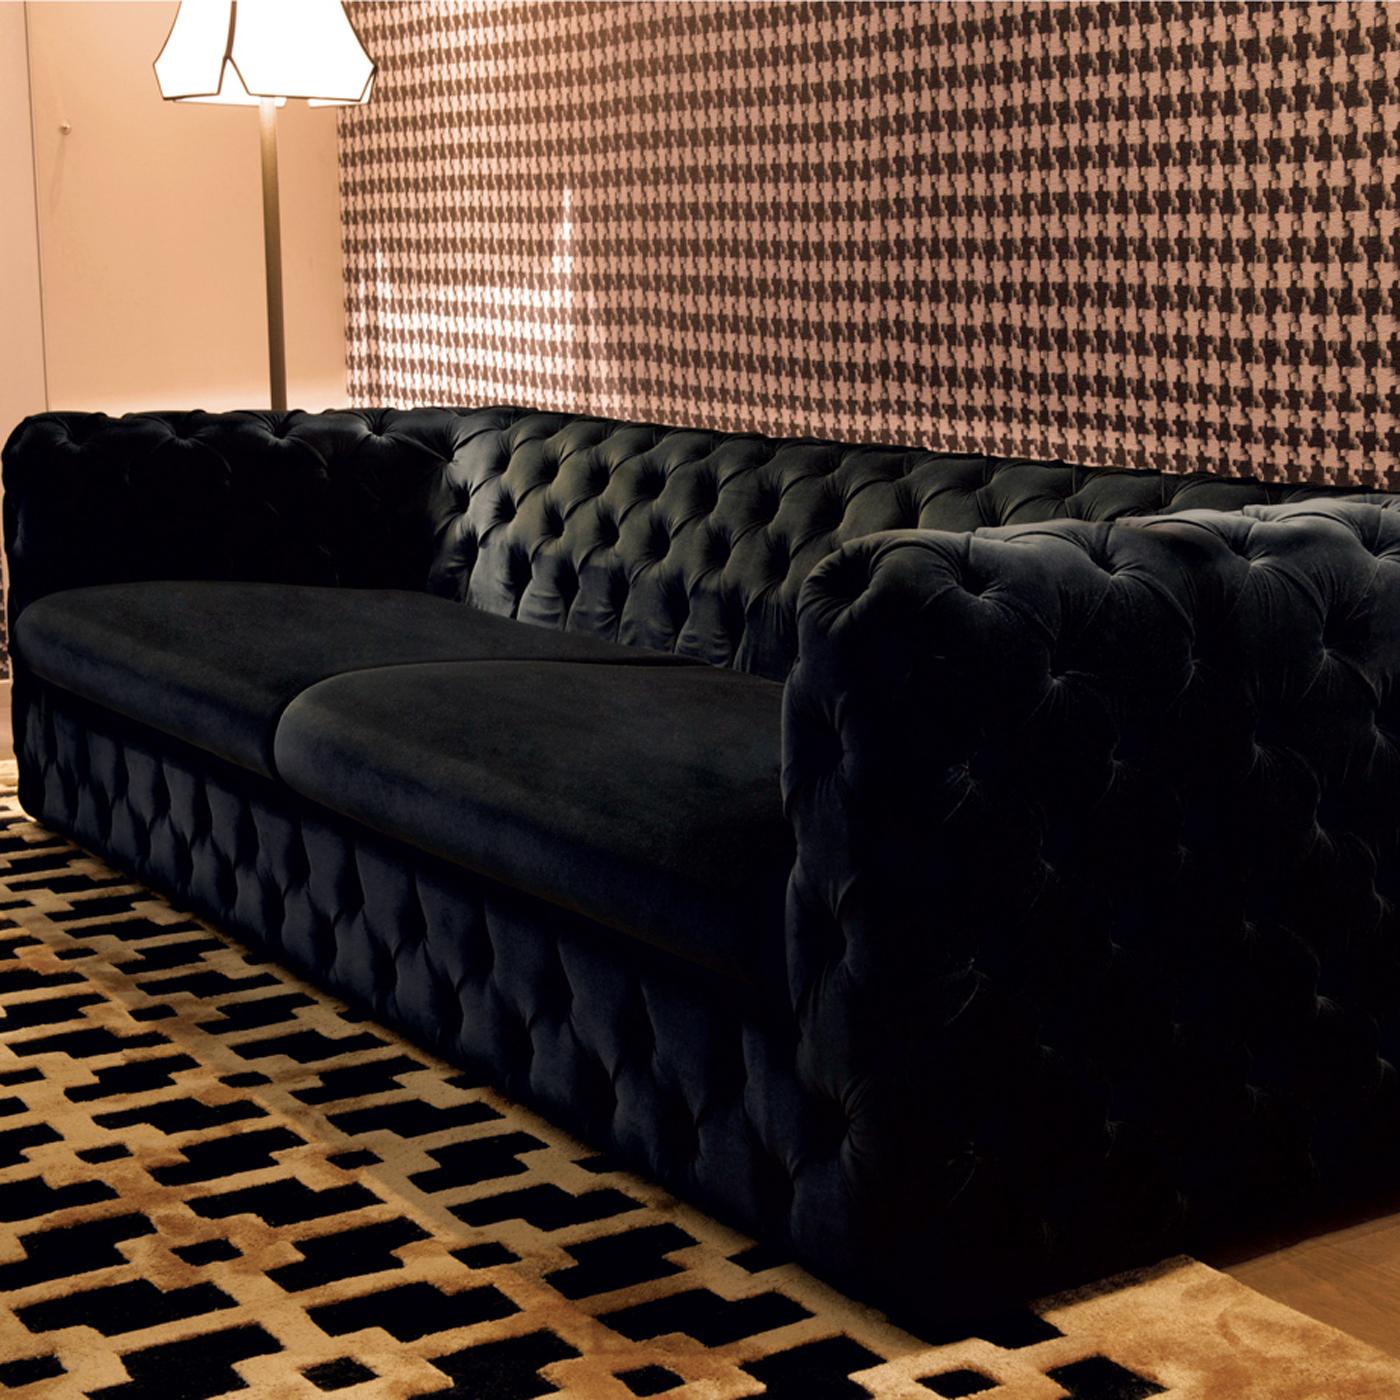 A modern twist on the classic Chesterfield style, this glamorous sofa has a vintage feel that will anchor a modern living room in statement-making style. The streamlined silhouette is padded with multi-density polyurethane and wrapped in a plush,